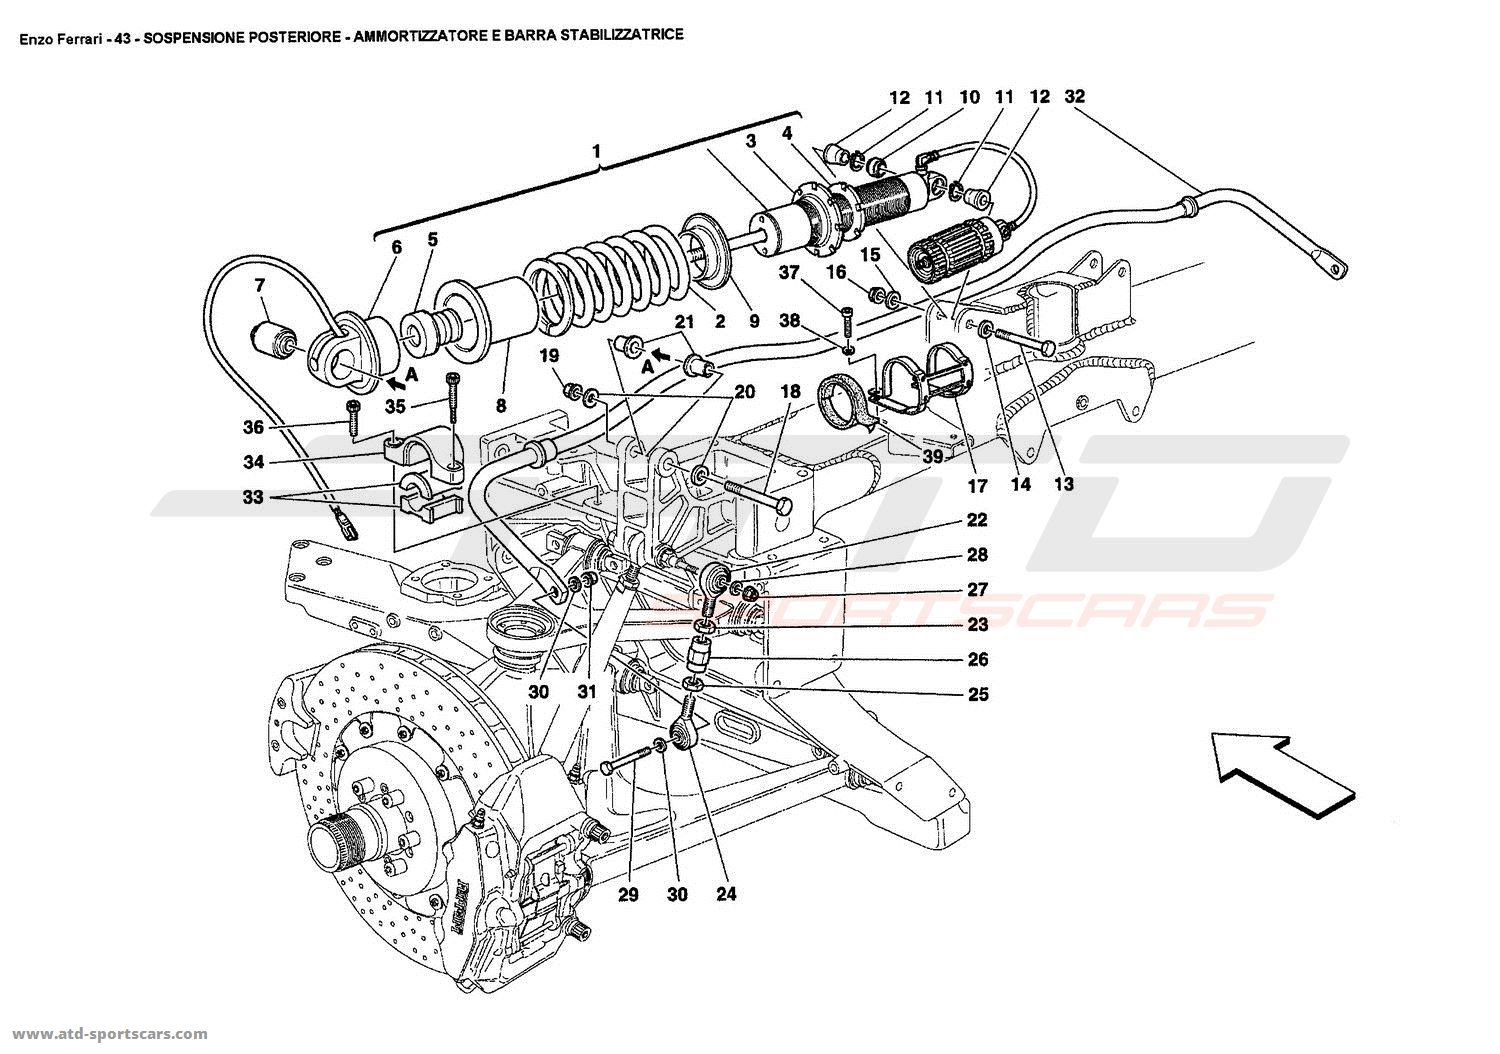 REAR SUSPENSIONS - SHOCK ABSORBER AND STABILIZER BAR